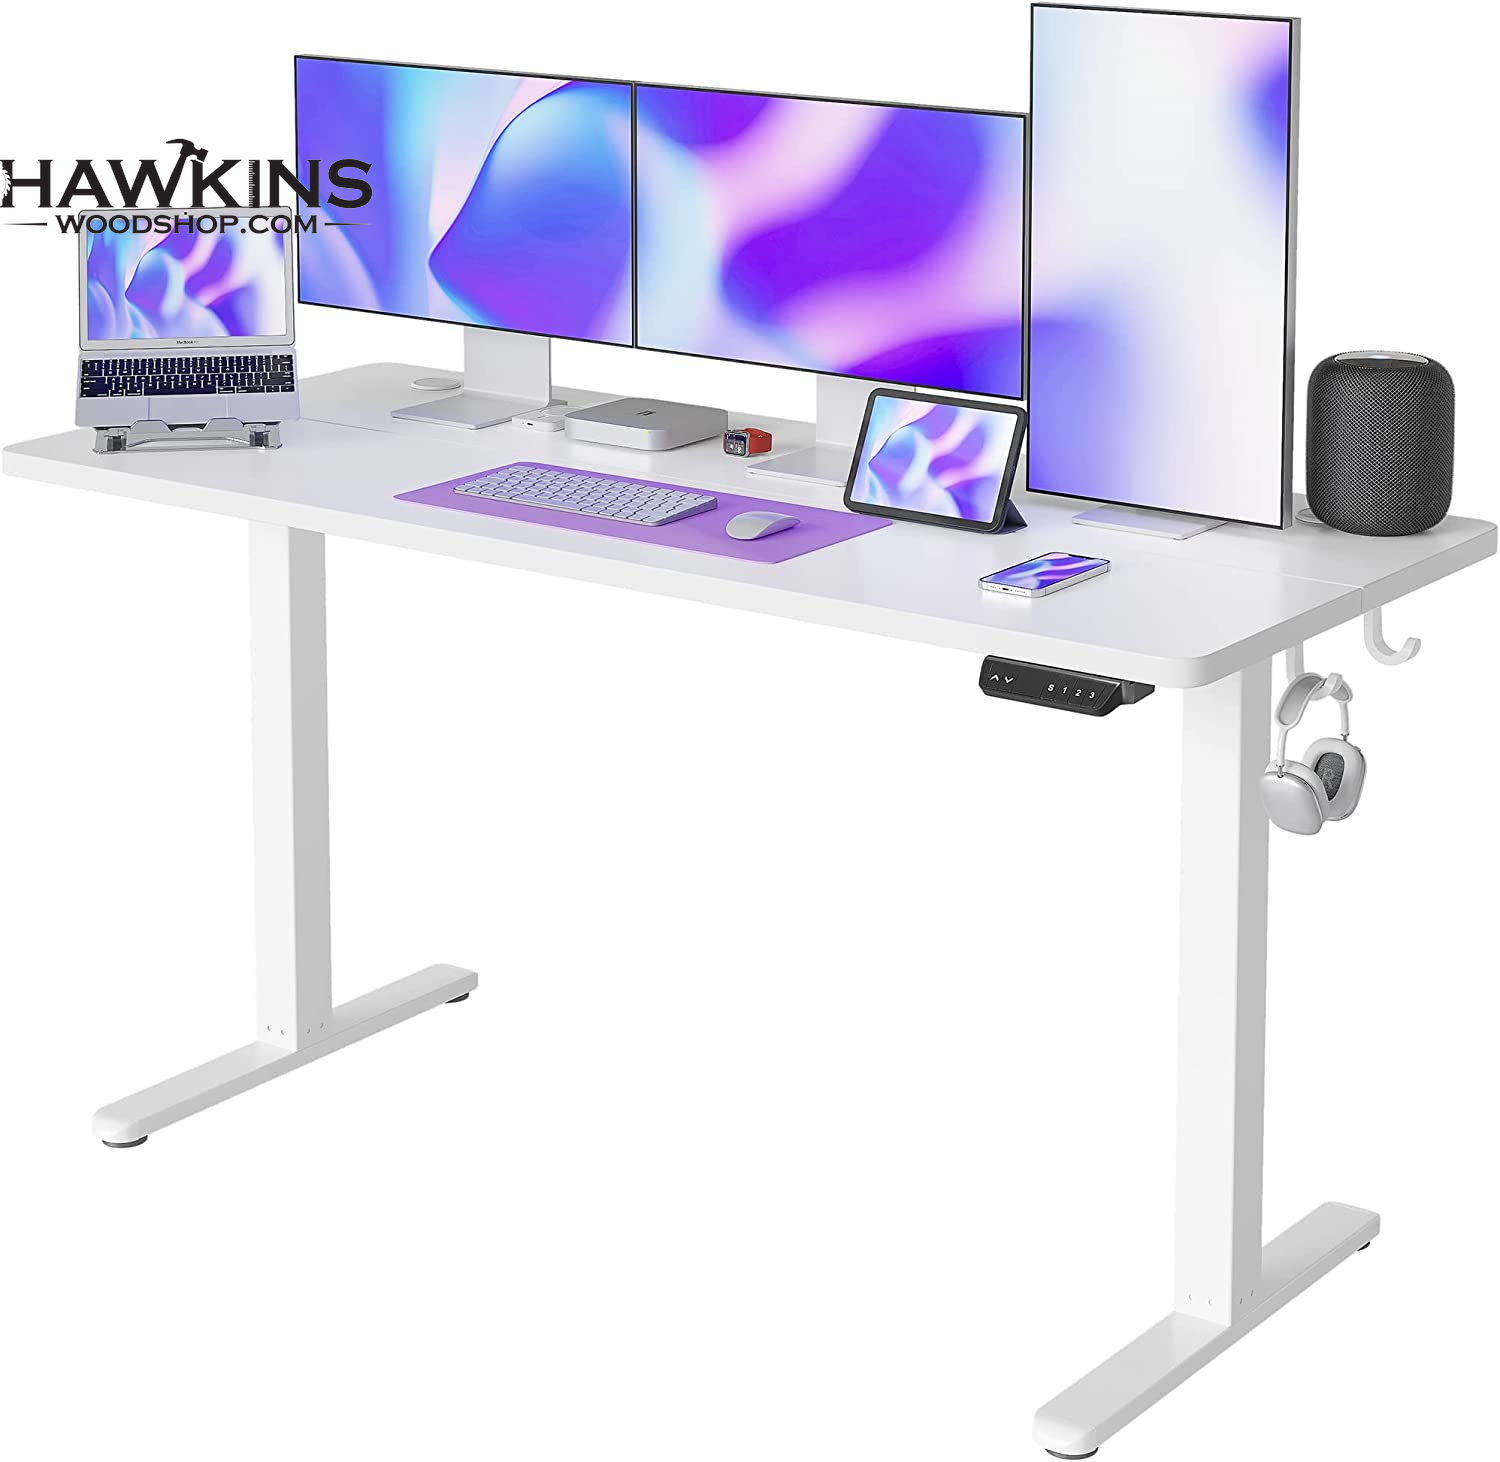 55x24'' Electric Standing Desk Adjustable Height Stand up Desk 27